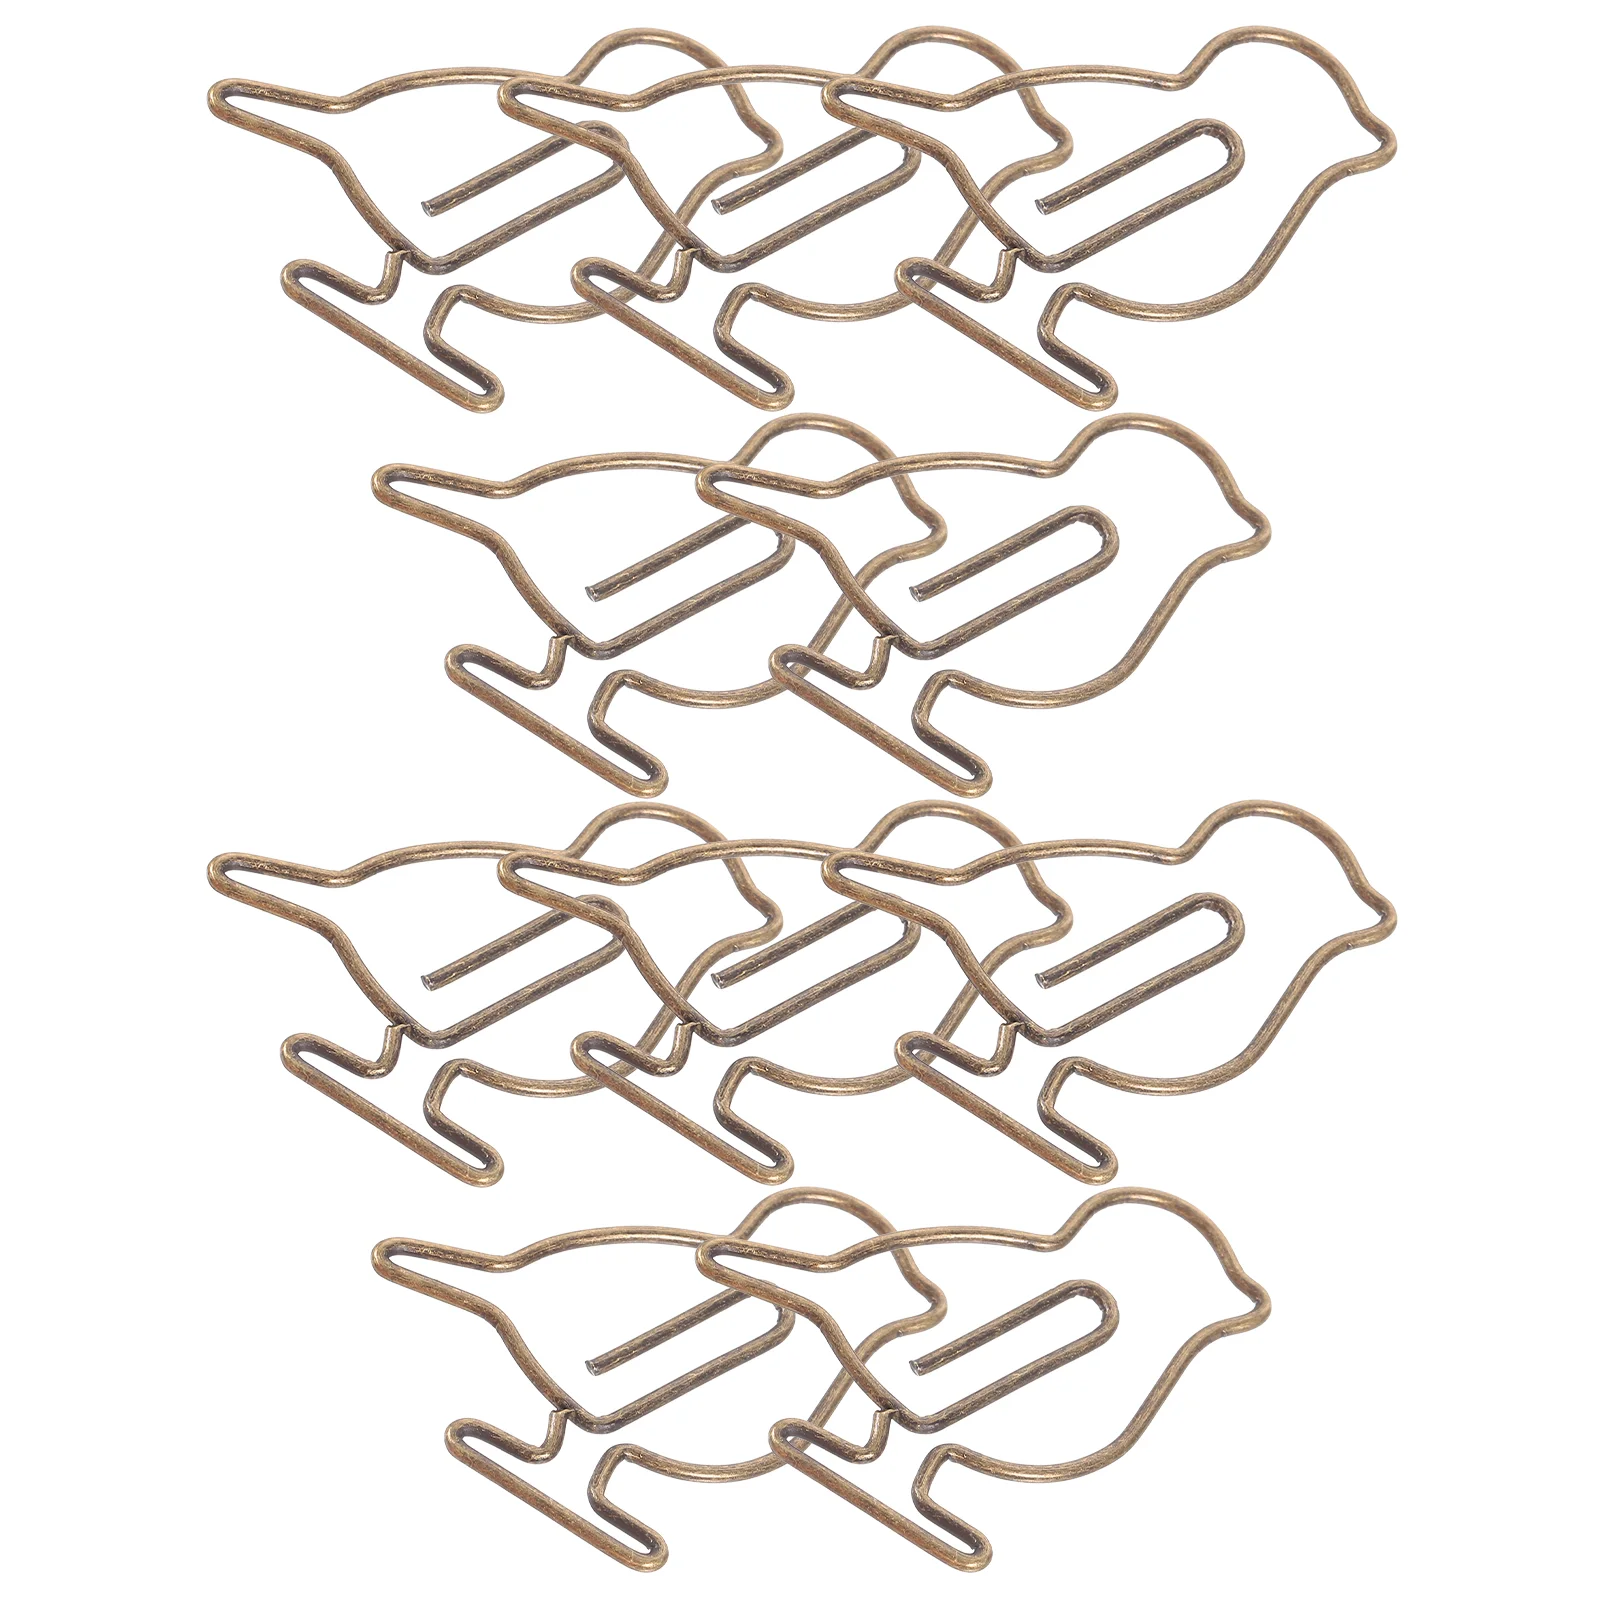 

Bird Paper Clip Cute Clips Document Small Office Paperclips Metal Delicate Bookmarks